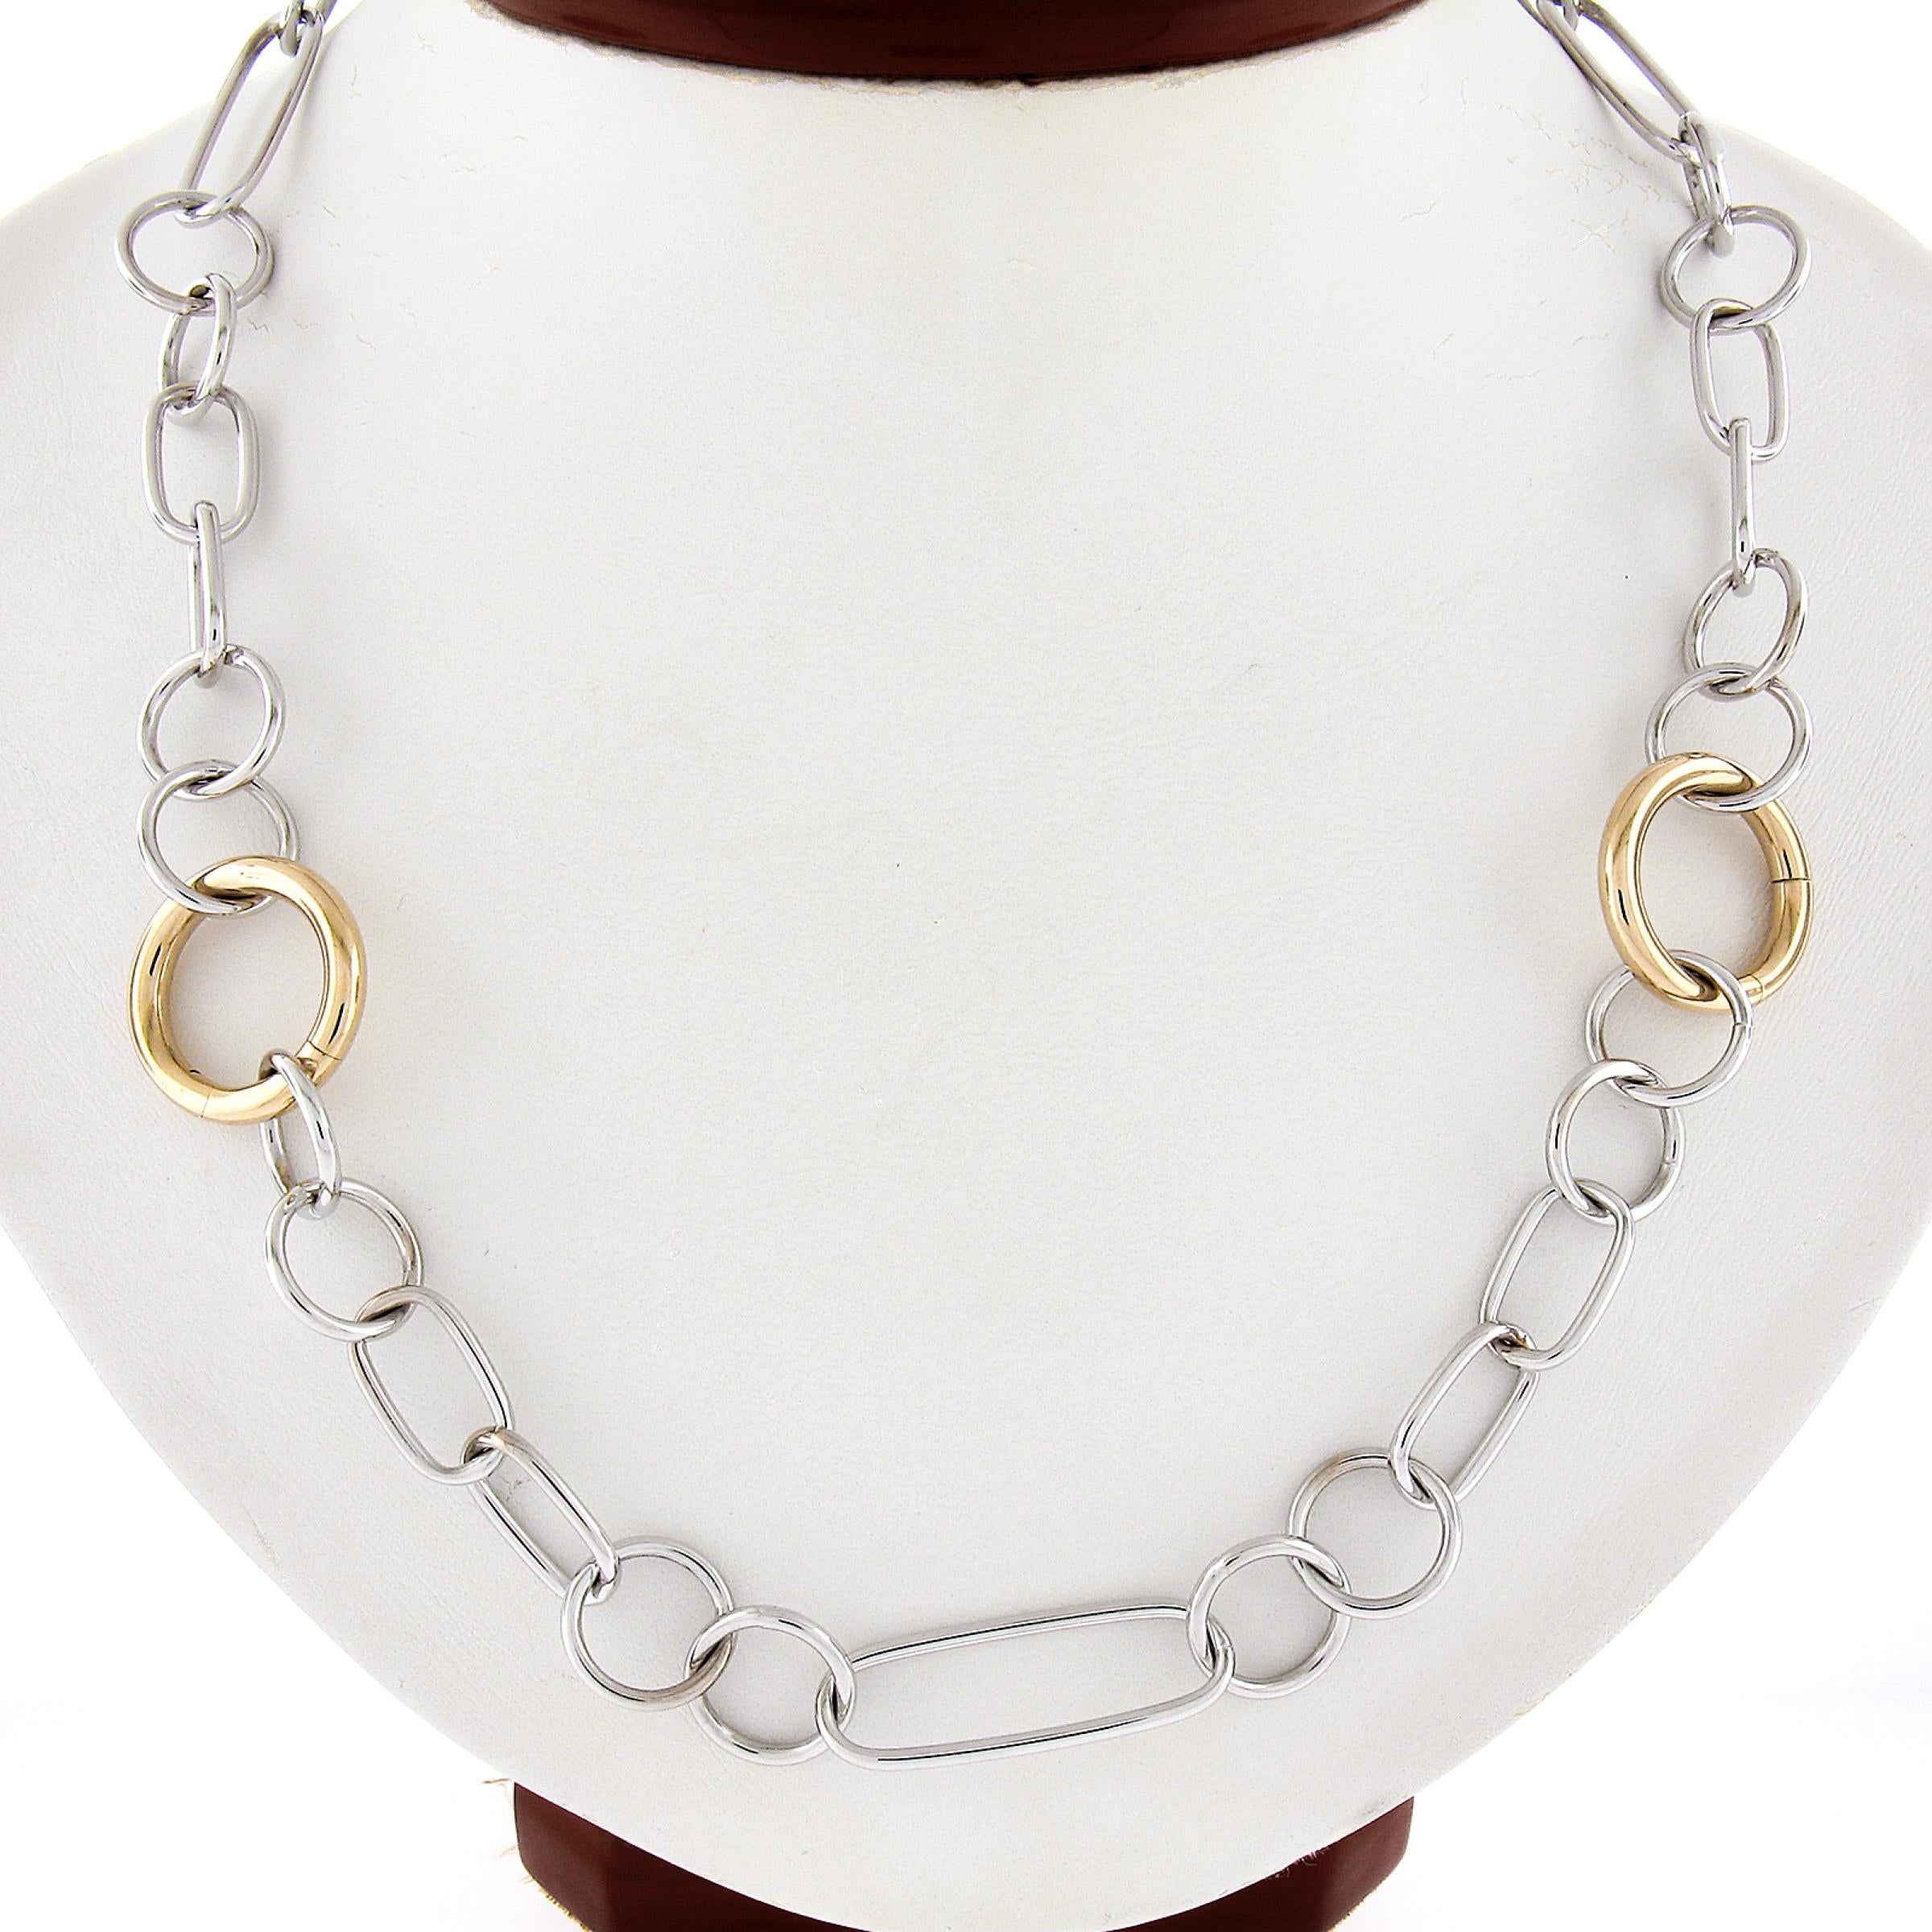 Here we have a magnificent solid 18k yellow and white gold stylish open work necklace! The Round Yellow gold links open to help adjust the length of the necklace shorter or wear as a bracelet. Well made and well thought out piece of super versatile